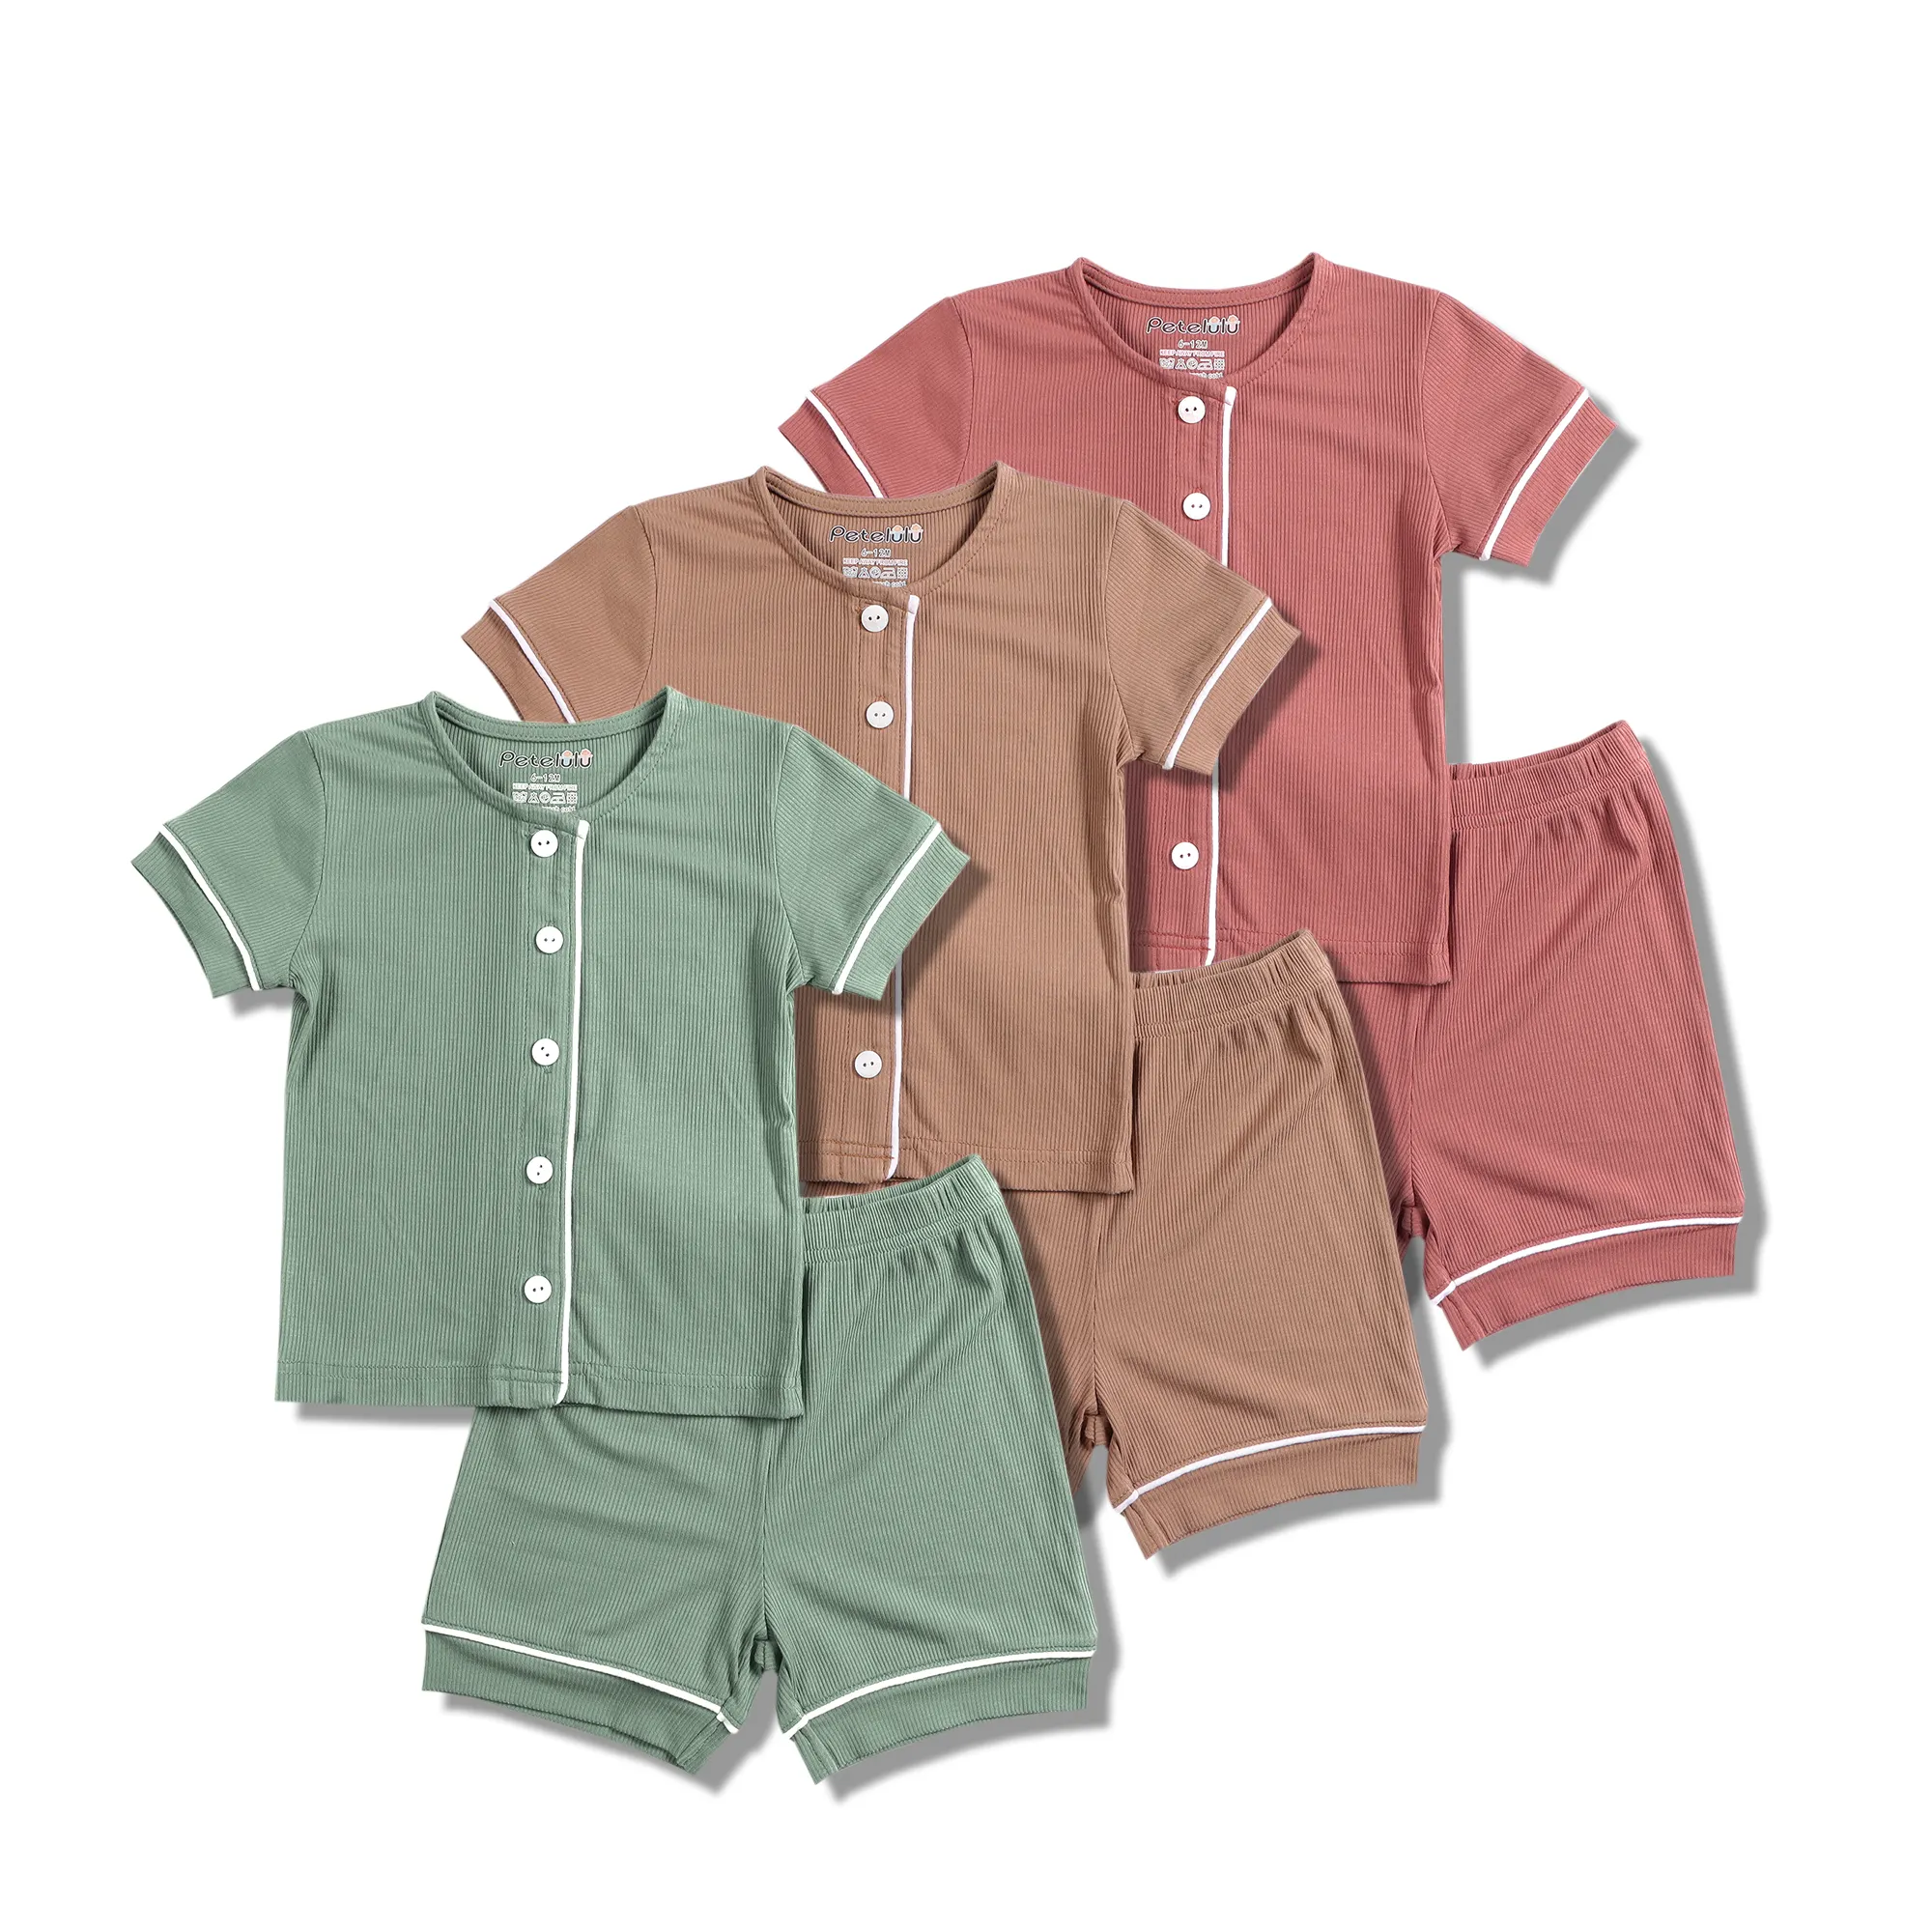 Toddler Baby Boys Girls Short sleeves Solid Tops+ Pants Outfits children clothes set Casual bamboo rib clothing